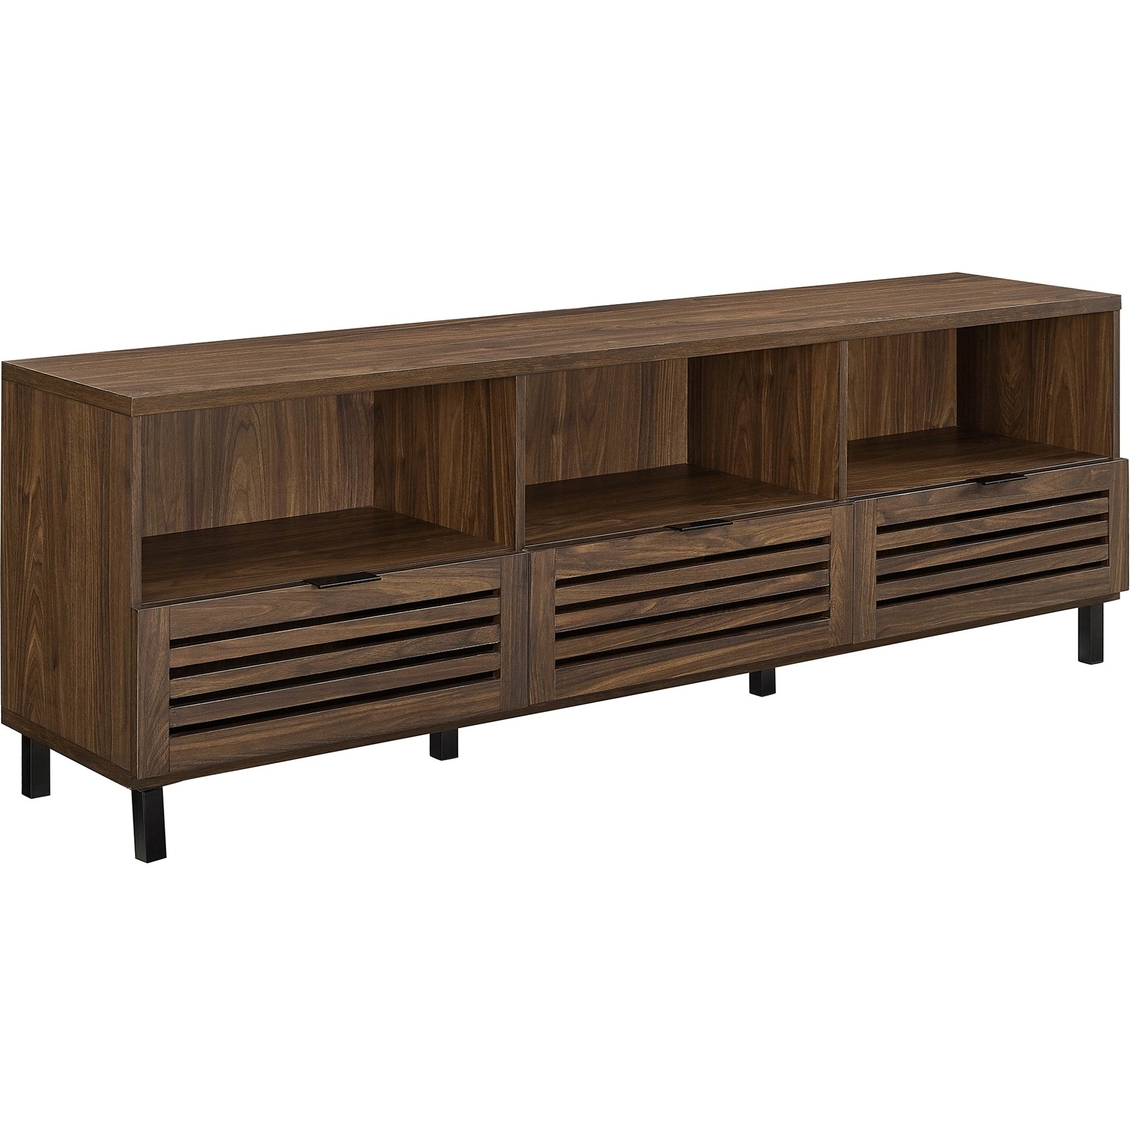 Walker Edison 70 in. Modern TV Stand with Slatted Drawers - Image 2 of 4